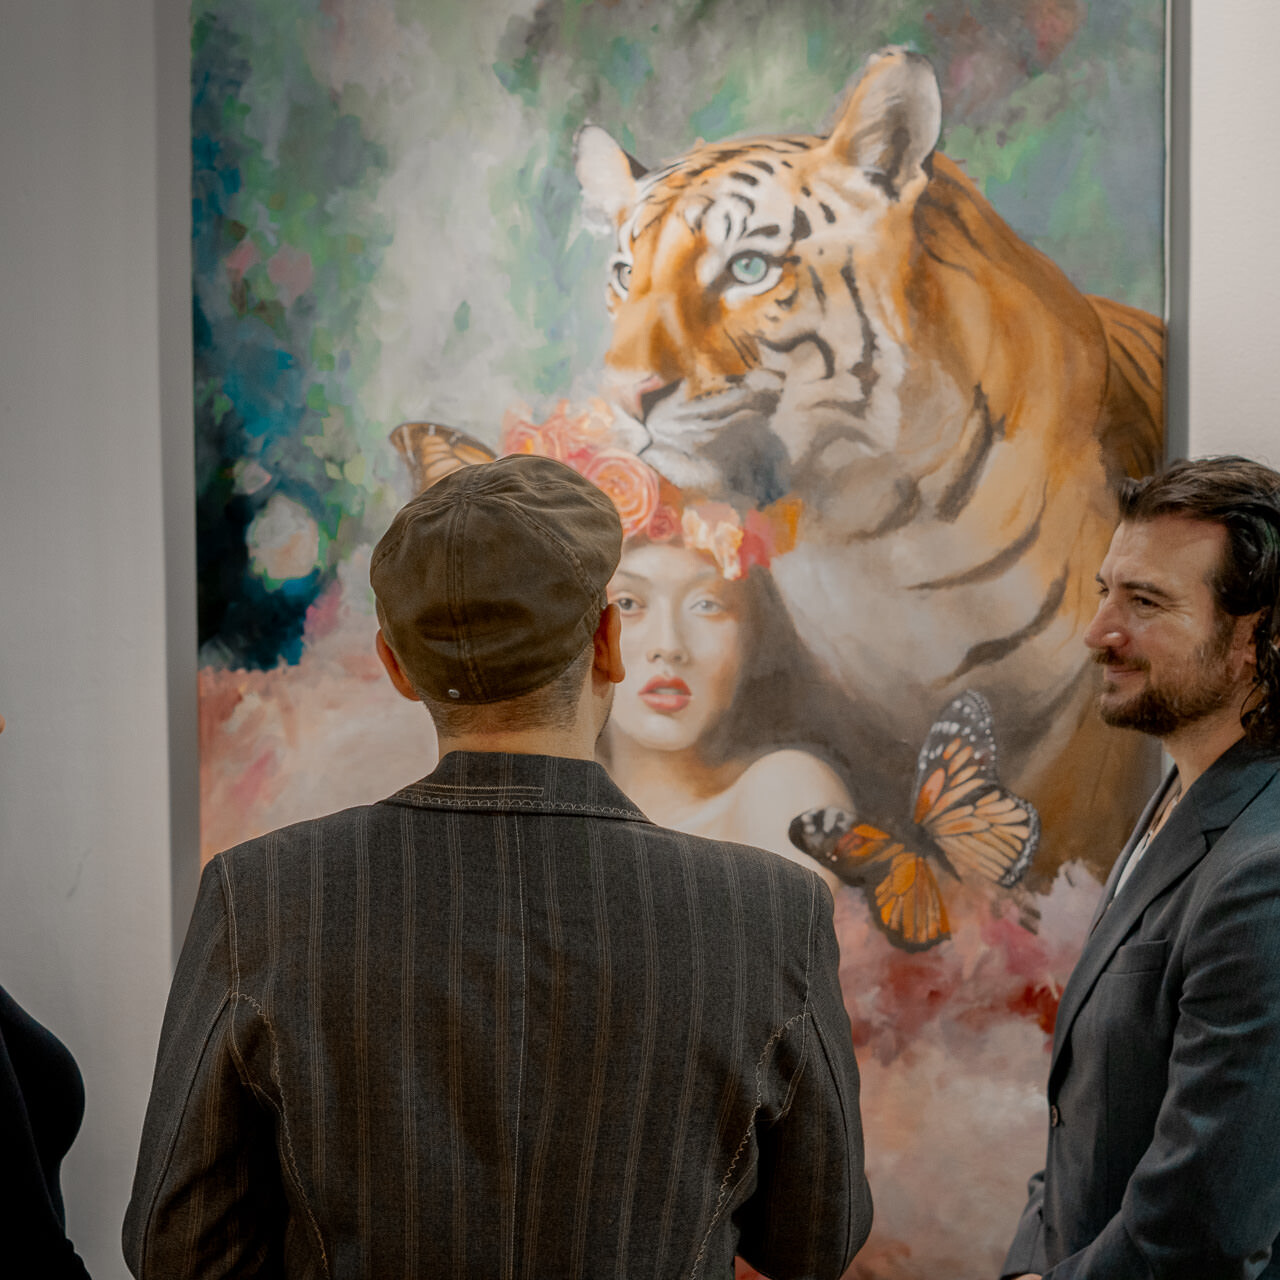 Alex Righetto converses with visitors at an art exhibition with 'The Guardian' in the background, illustrating the power of art to foster dialogue.